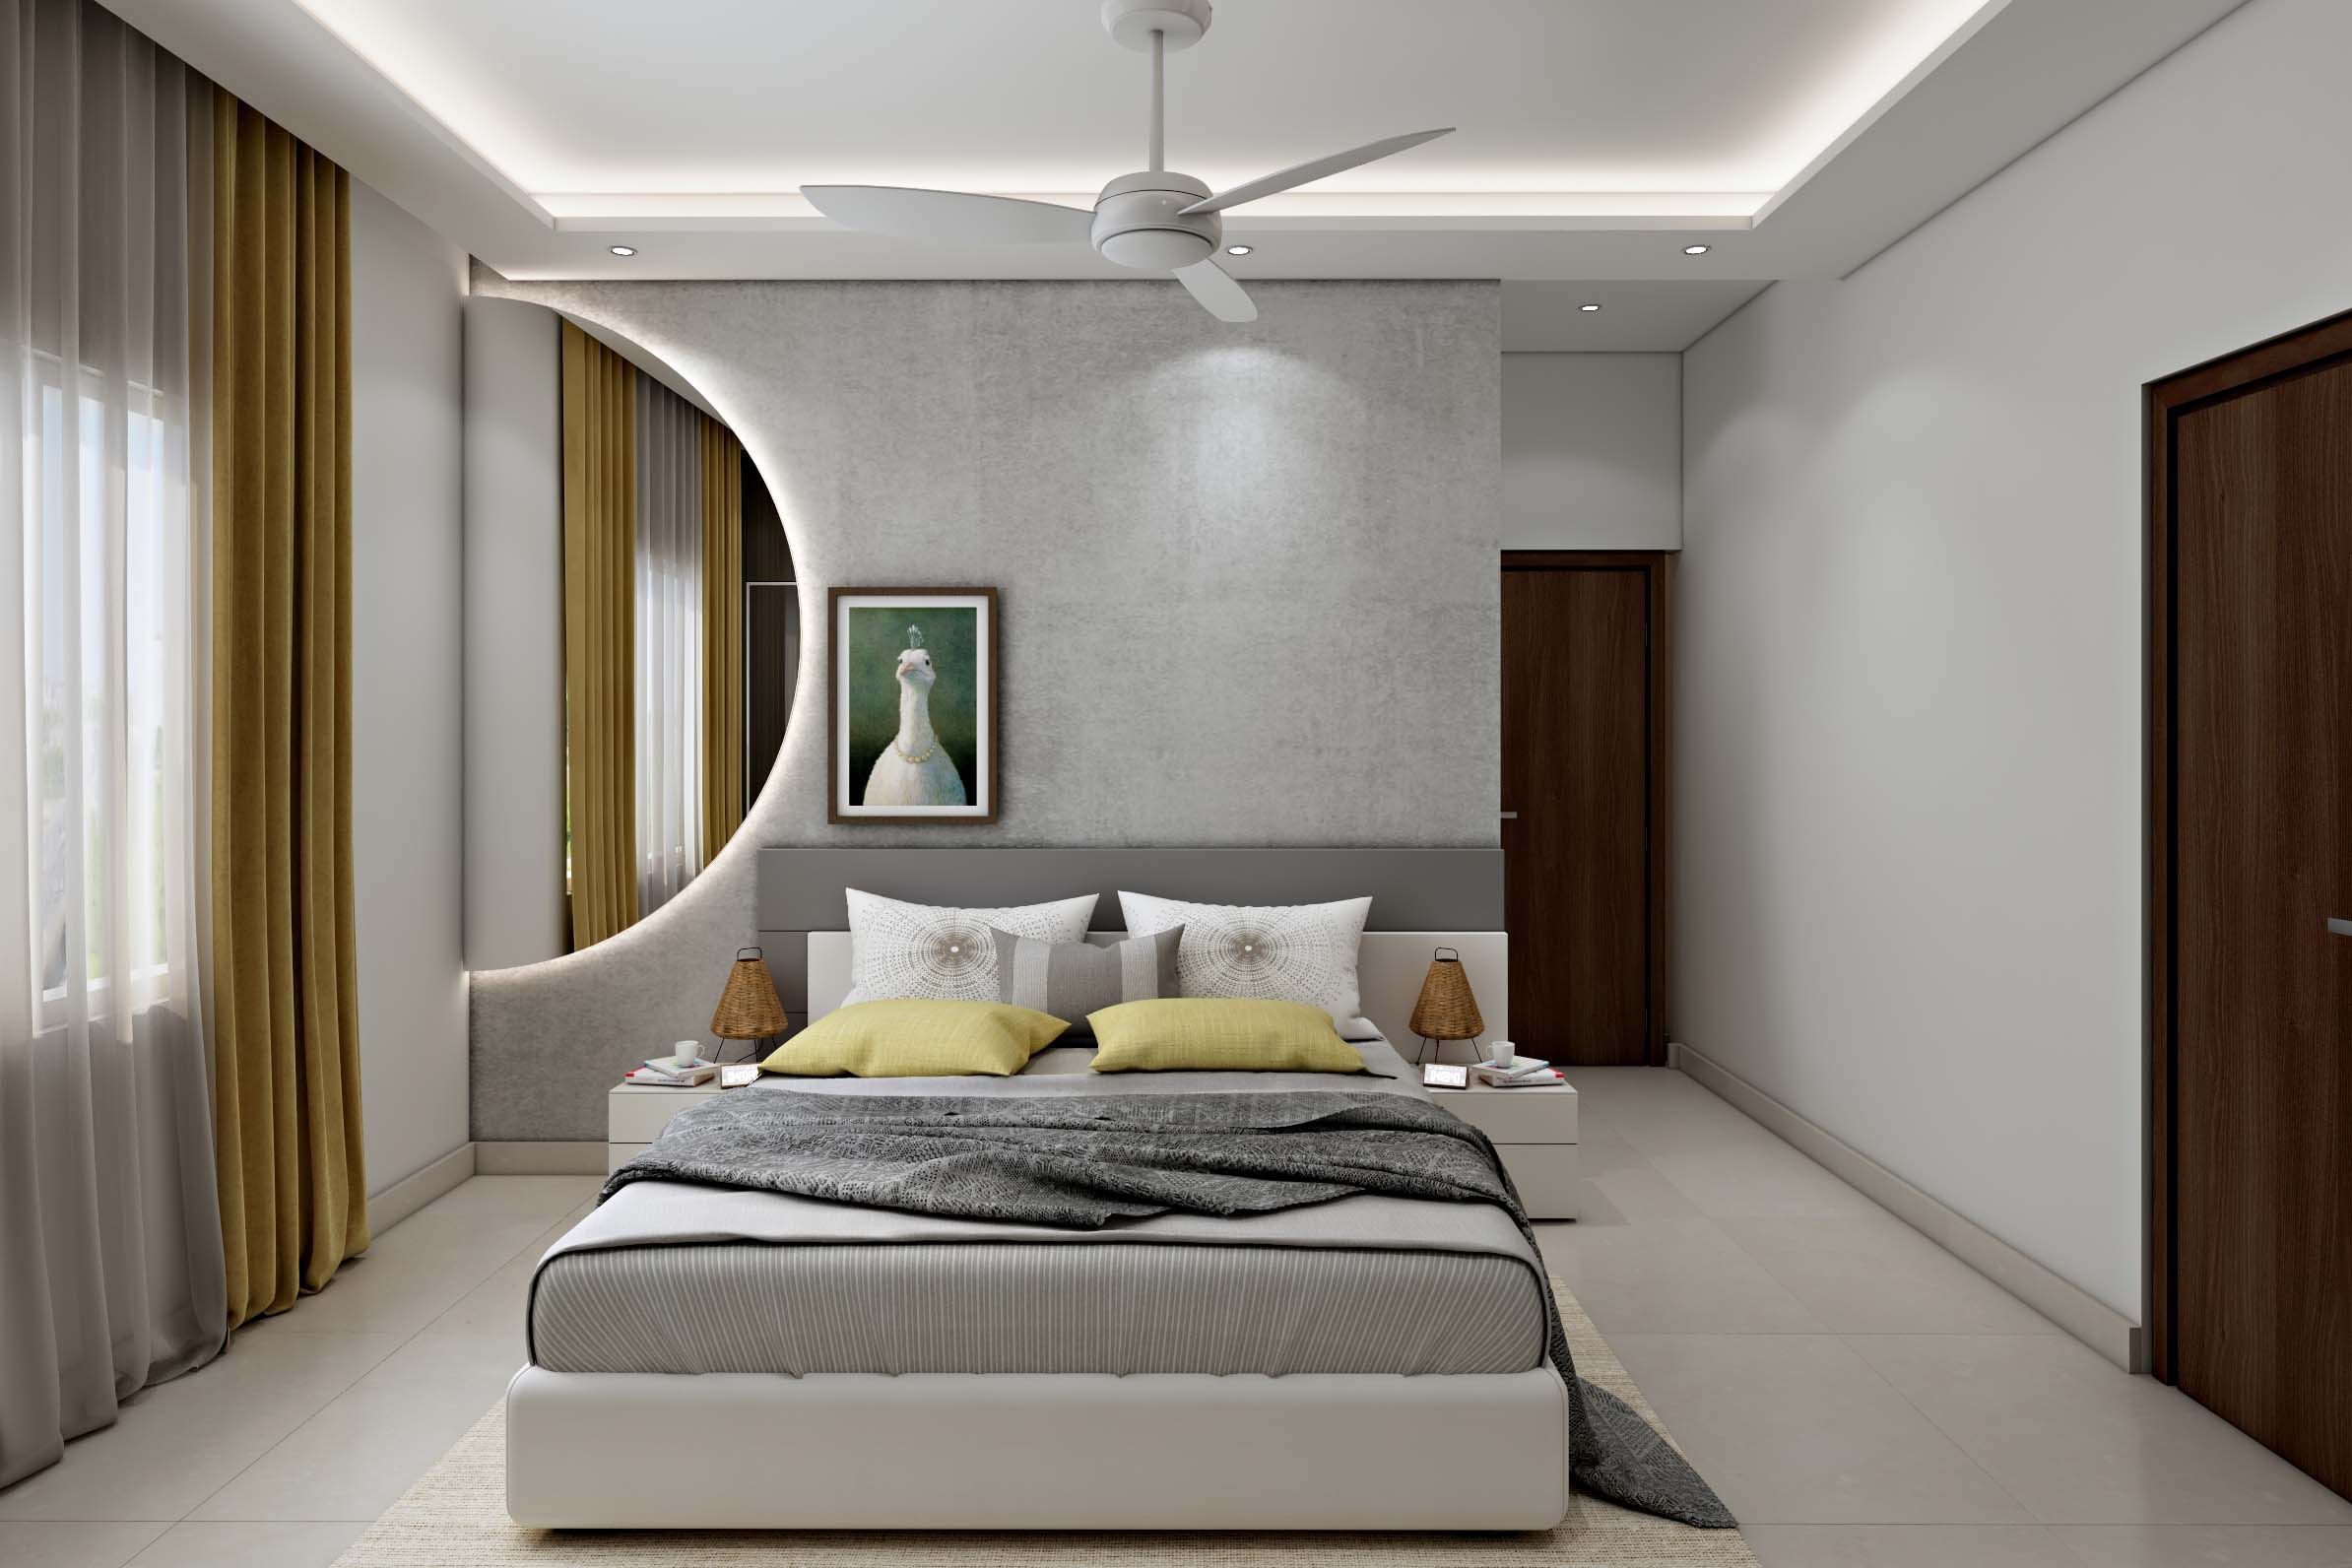 Modern Spacious Master Bedroom Design With Grey Hues | Livspace